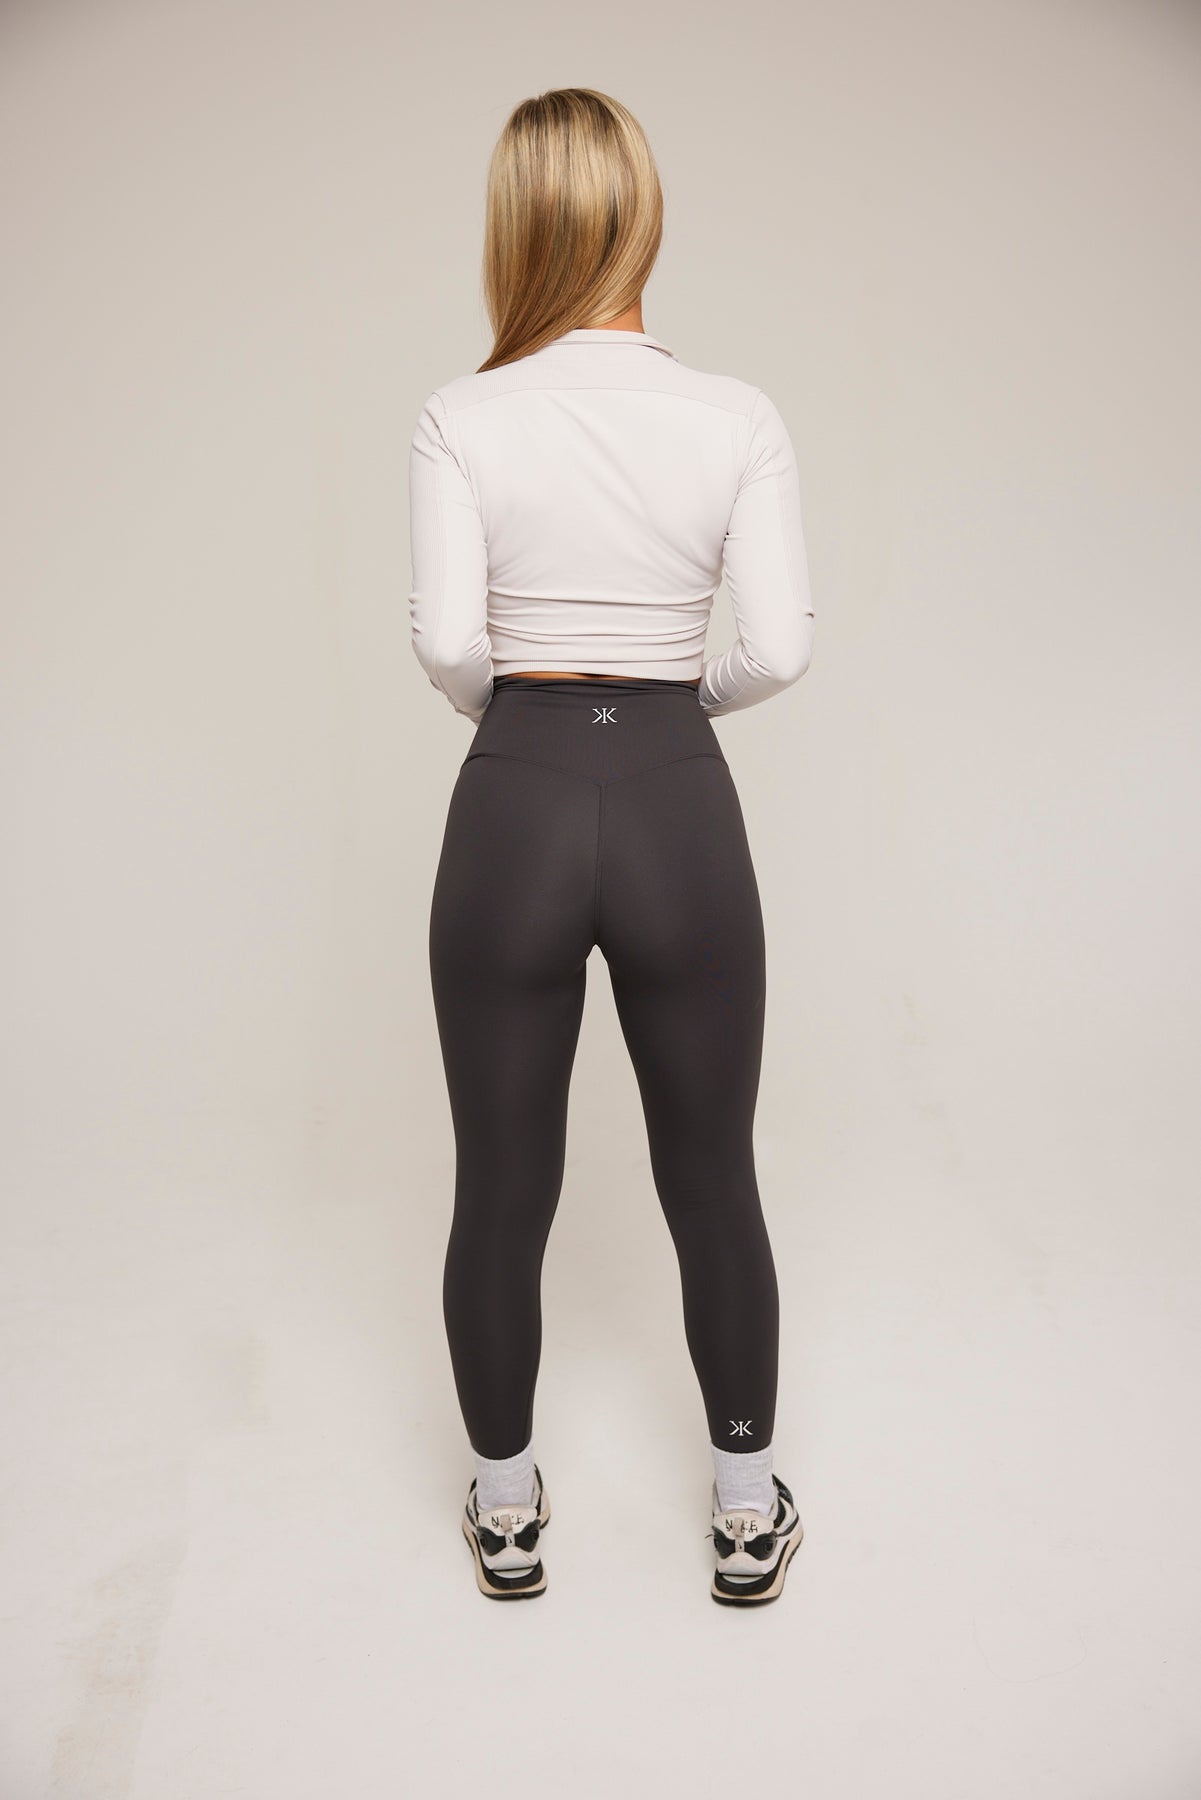 Ideology Gradient Leggings (Charcoal top to grayish bottom) Size S